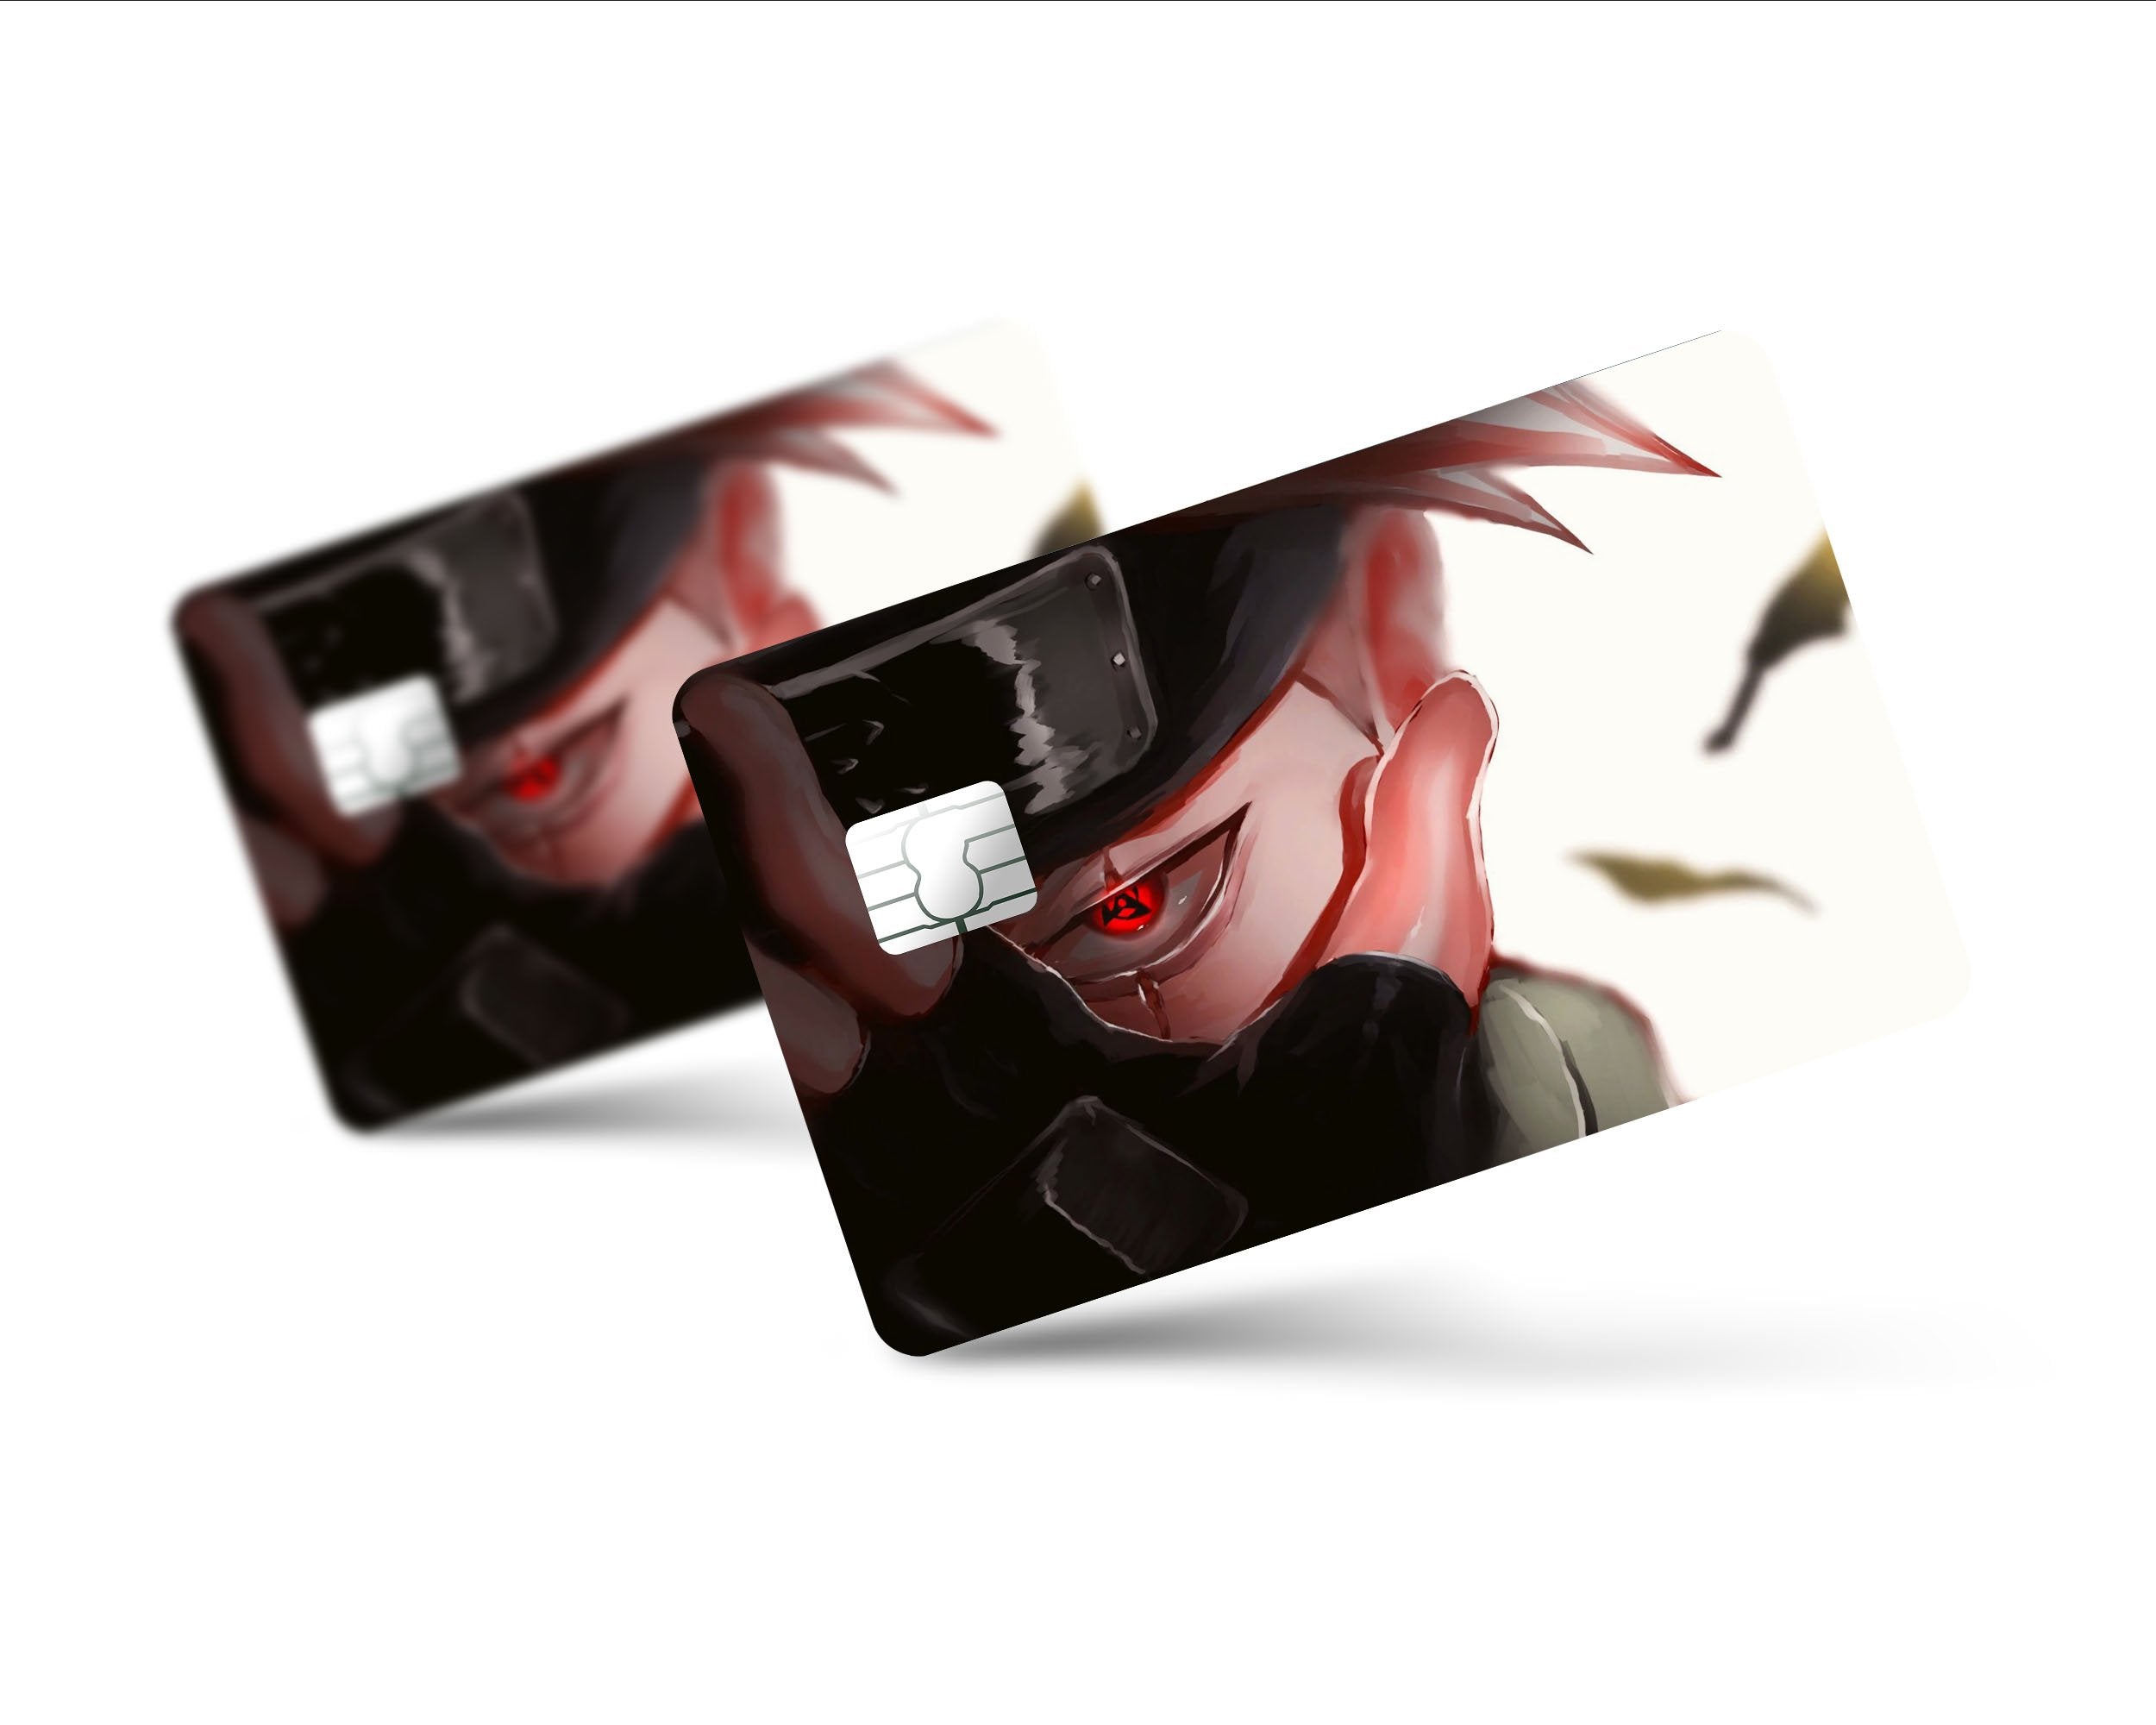 Looking for Anime Card Covers  Skins  Blitz Covers